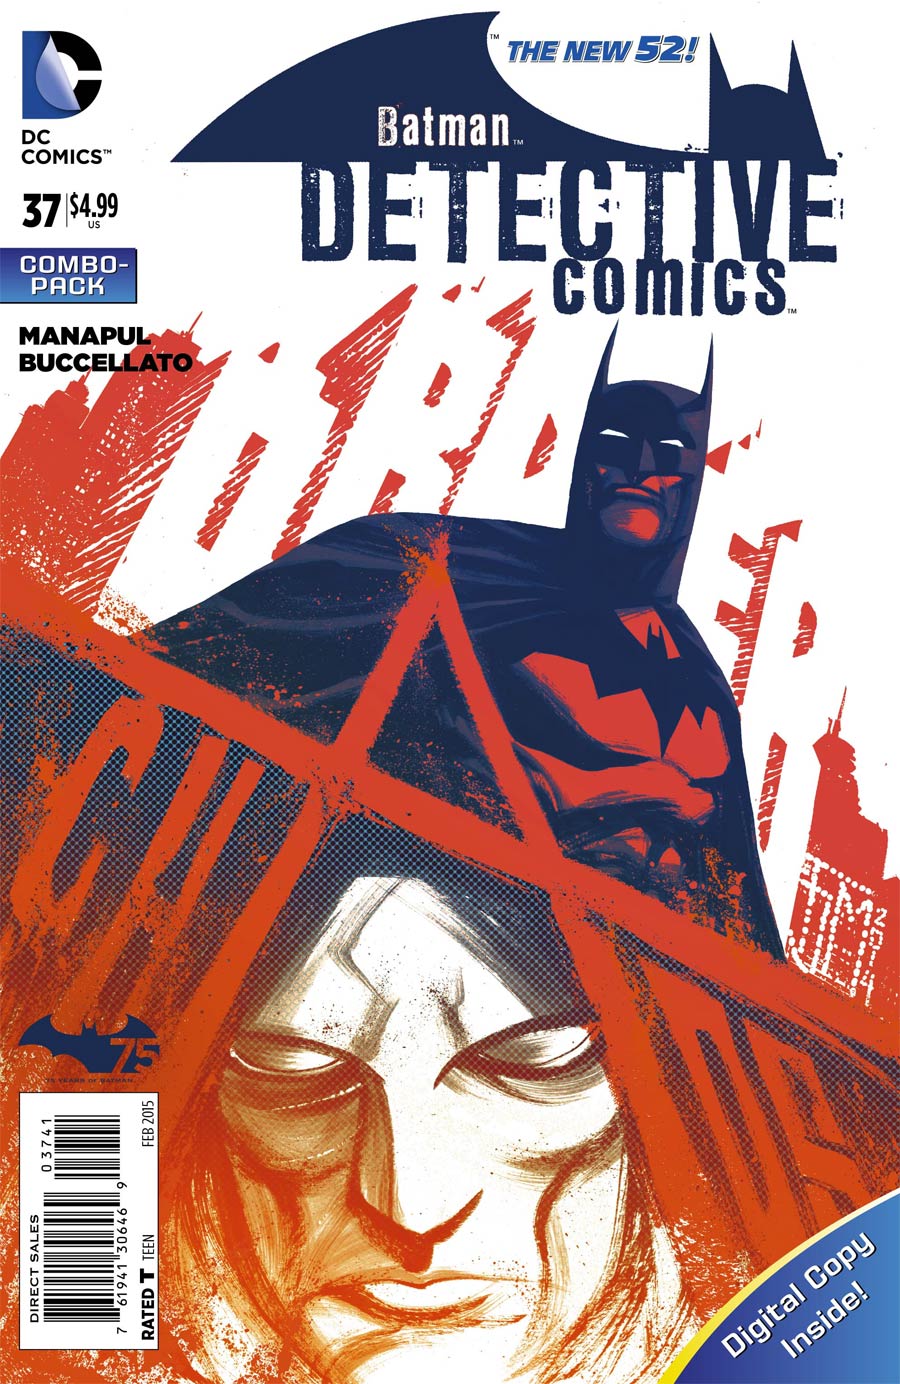 Detective Comics Vol 2 #37 Cover D Combo Pack Without Polybag